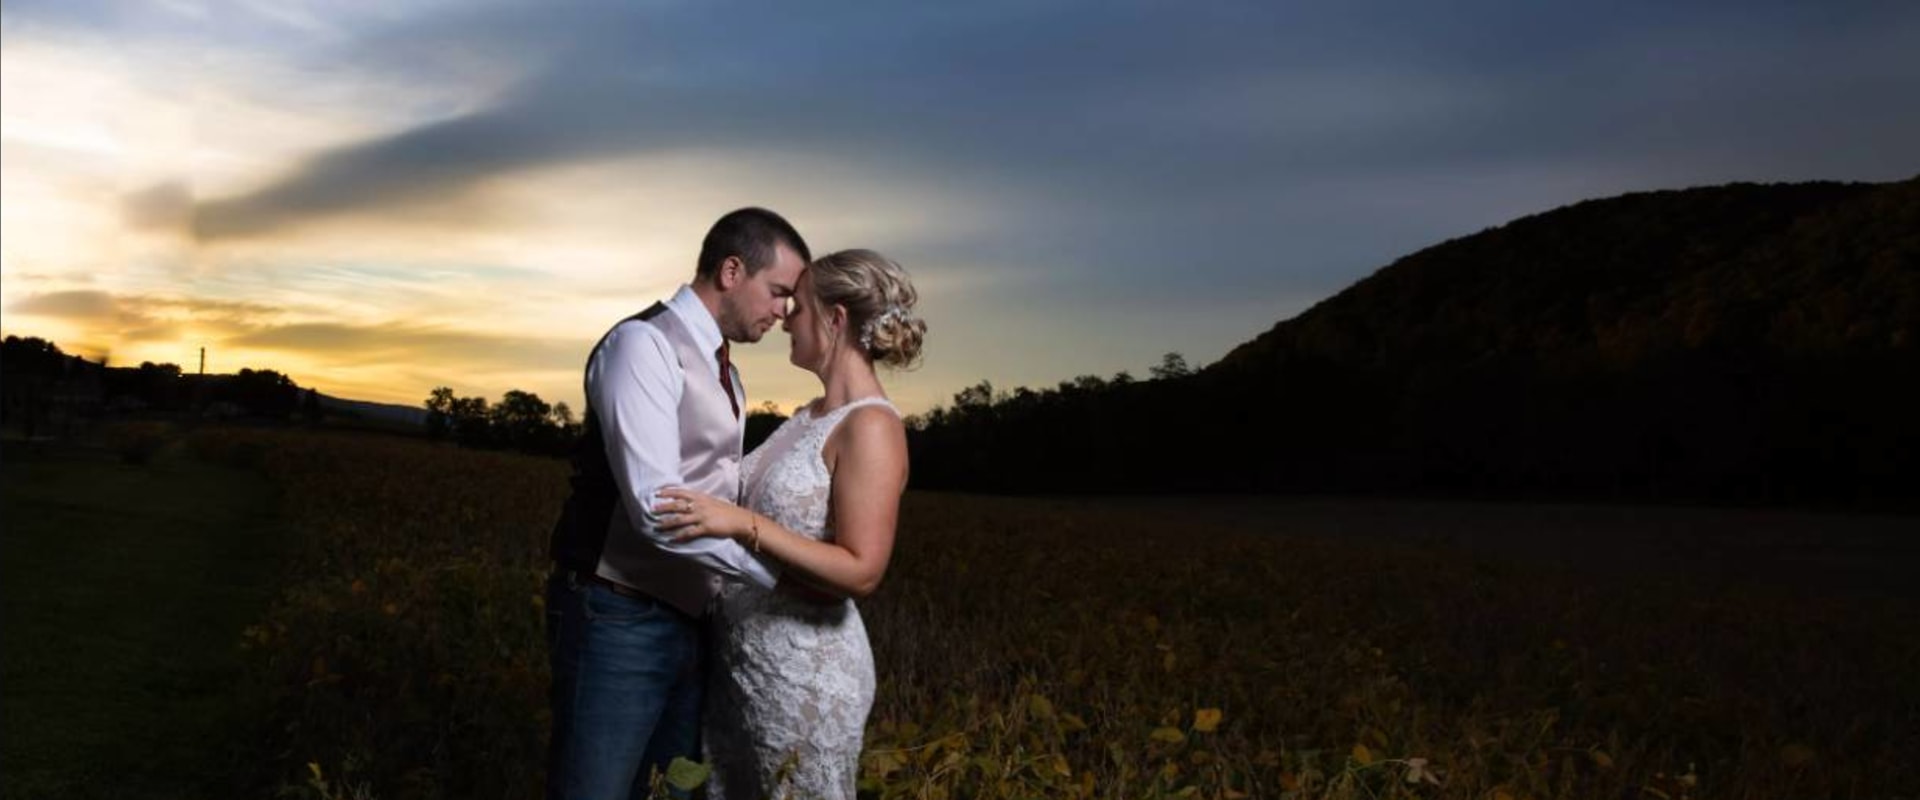 Capture Authentic Real-Life Moments with Professional Photography Services in Bucks County, PA